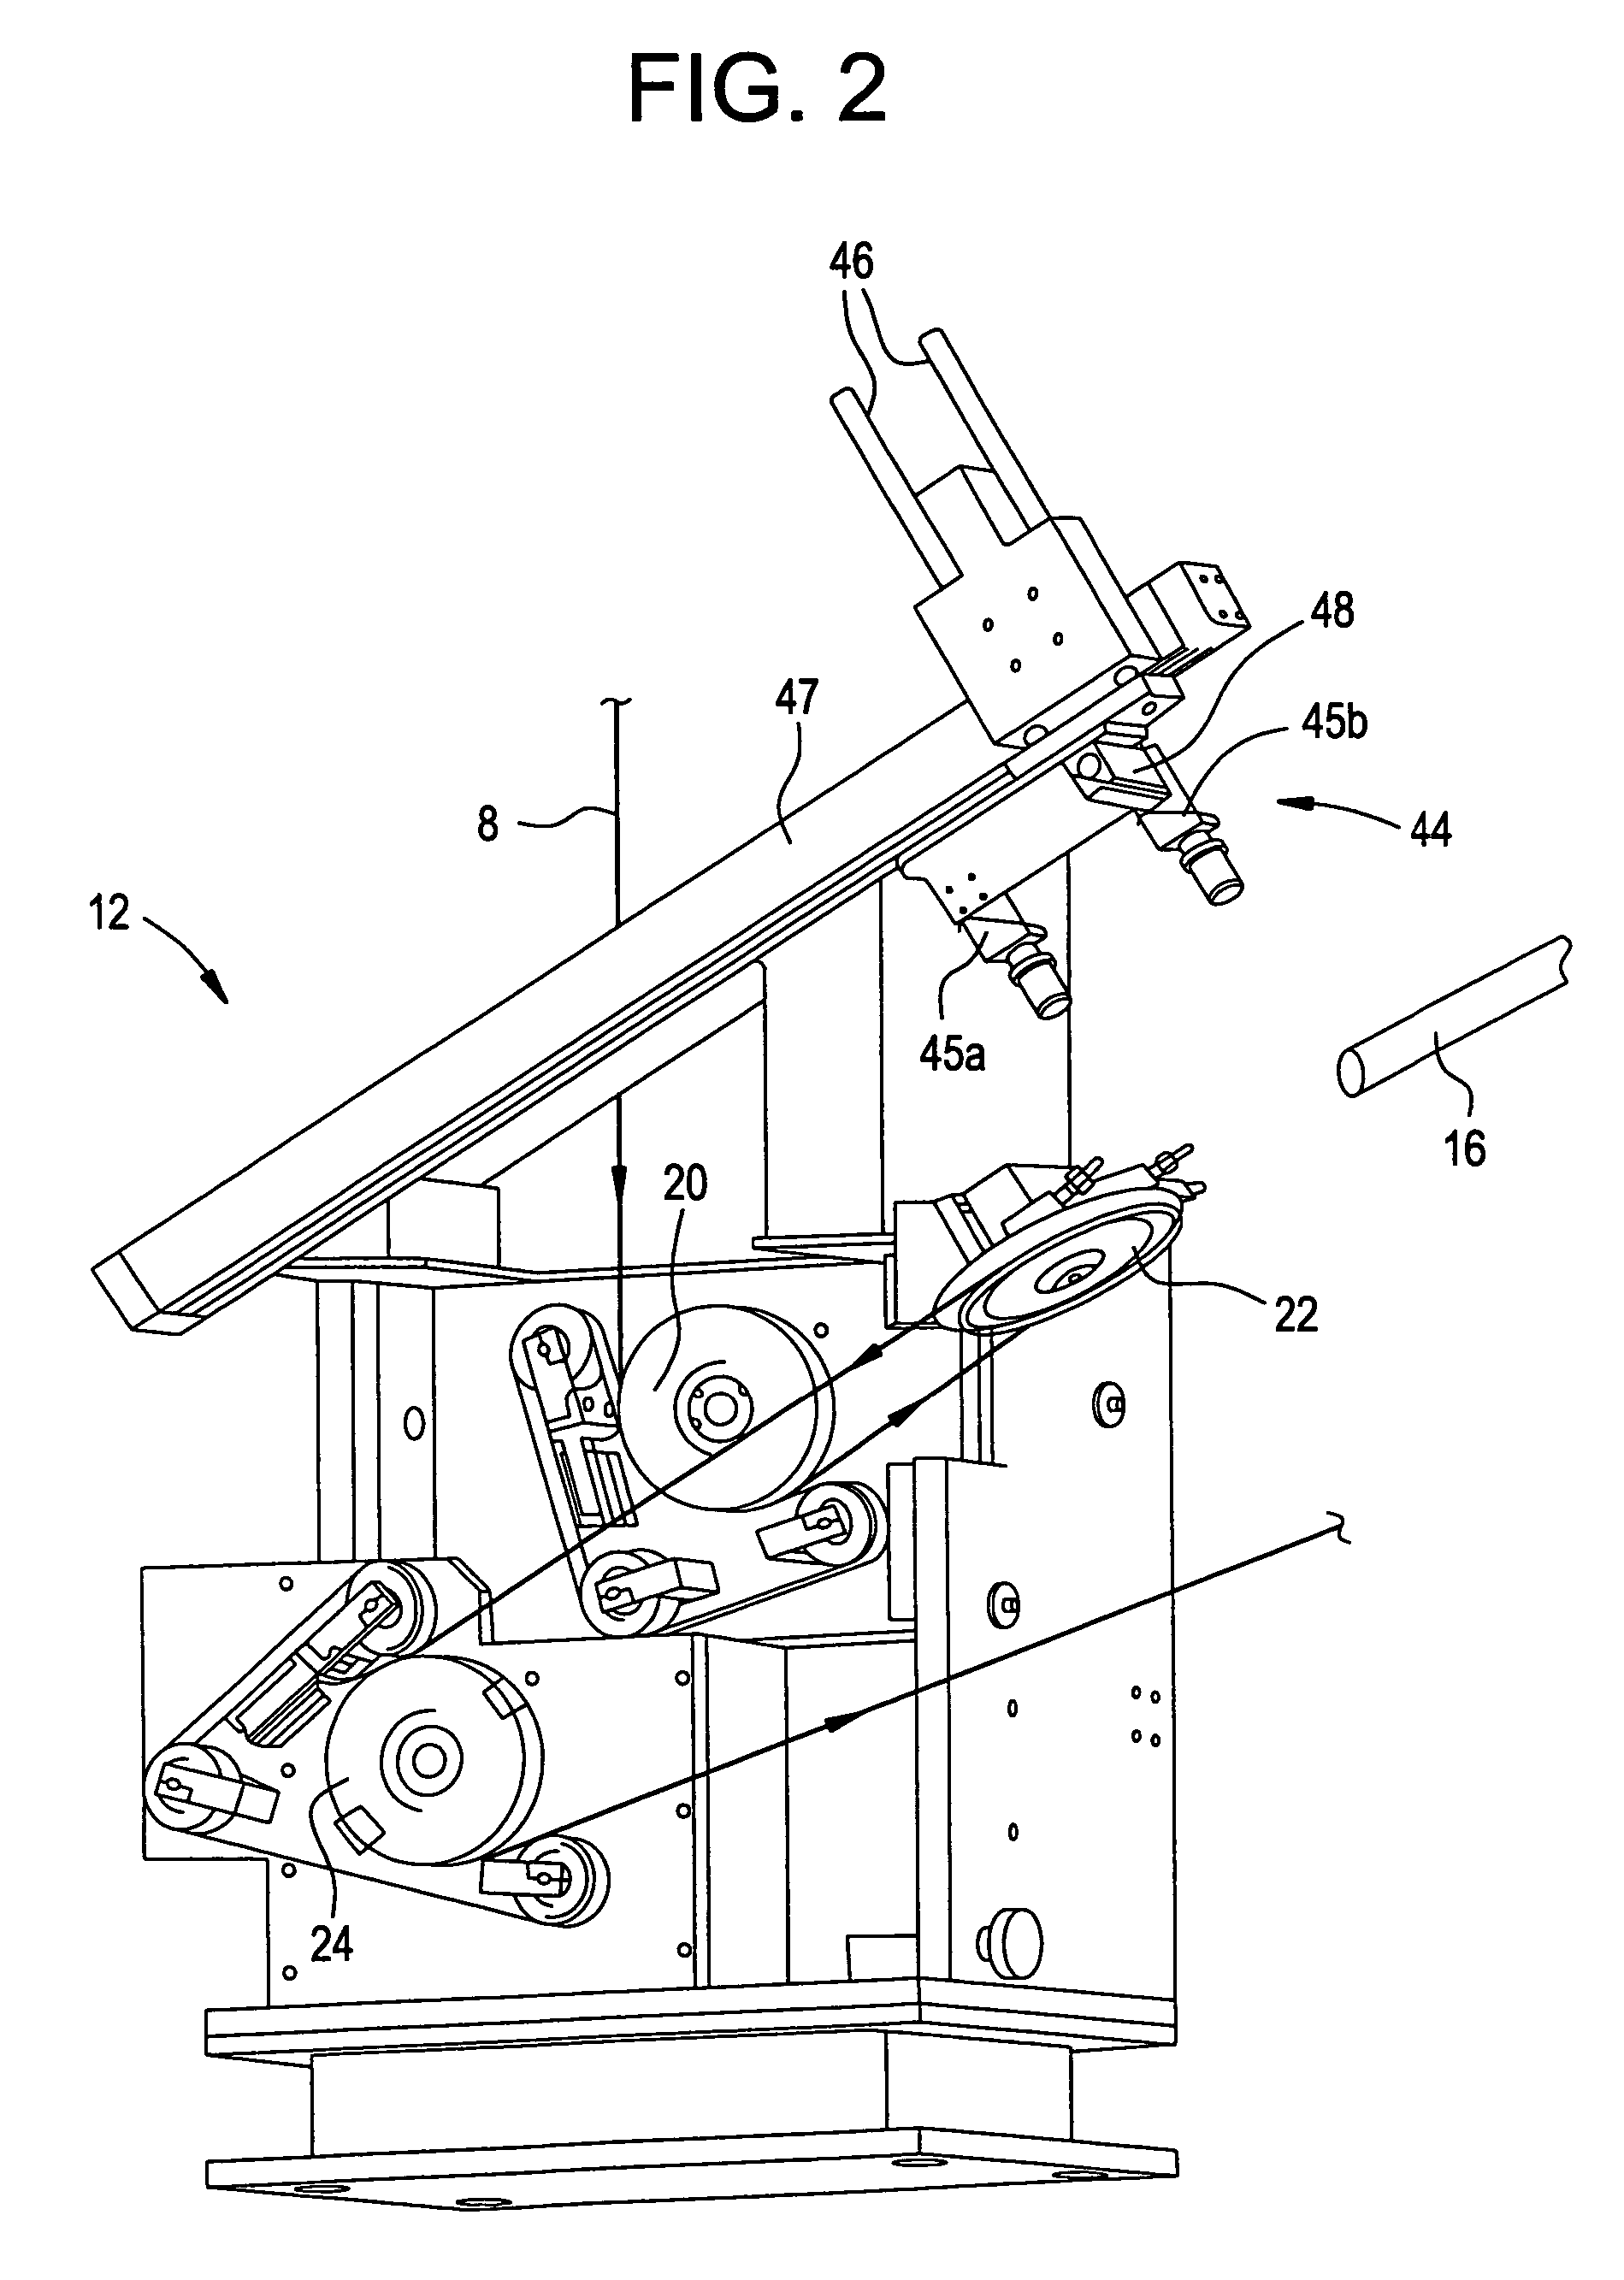 Method and apparatus for tensile testing and rethreading optical fiber during fiber draw